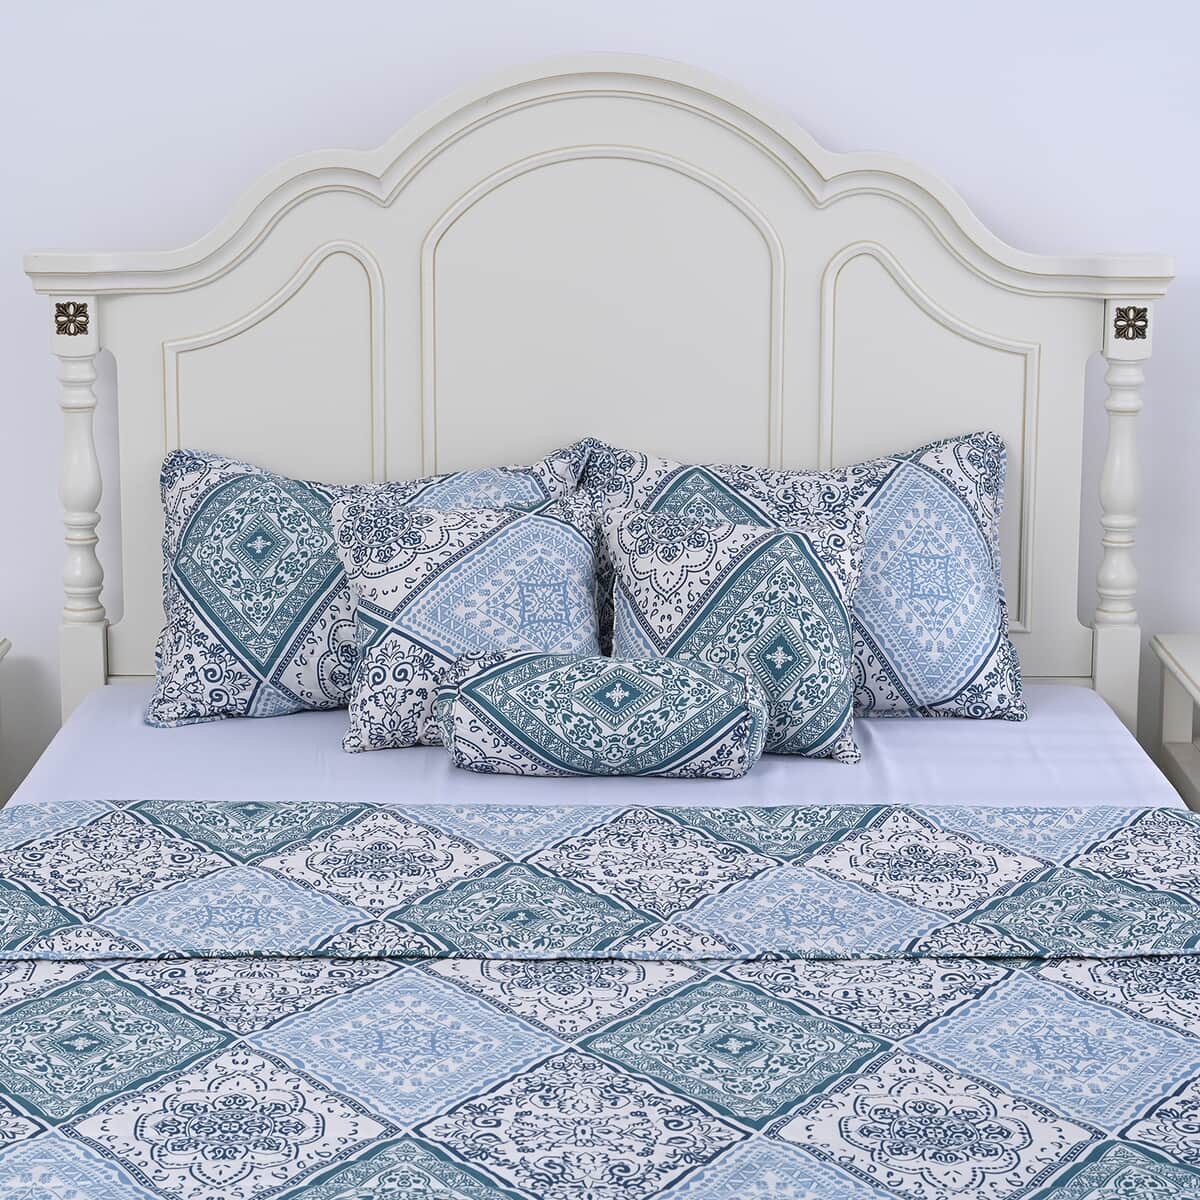 Homesmart Blue and Green Flower Printed 6pcs Quilt Set - Queen (100% Microfiber) image number 2